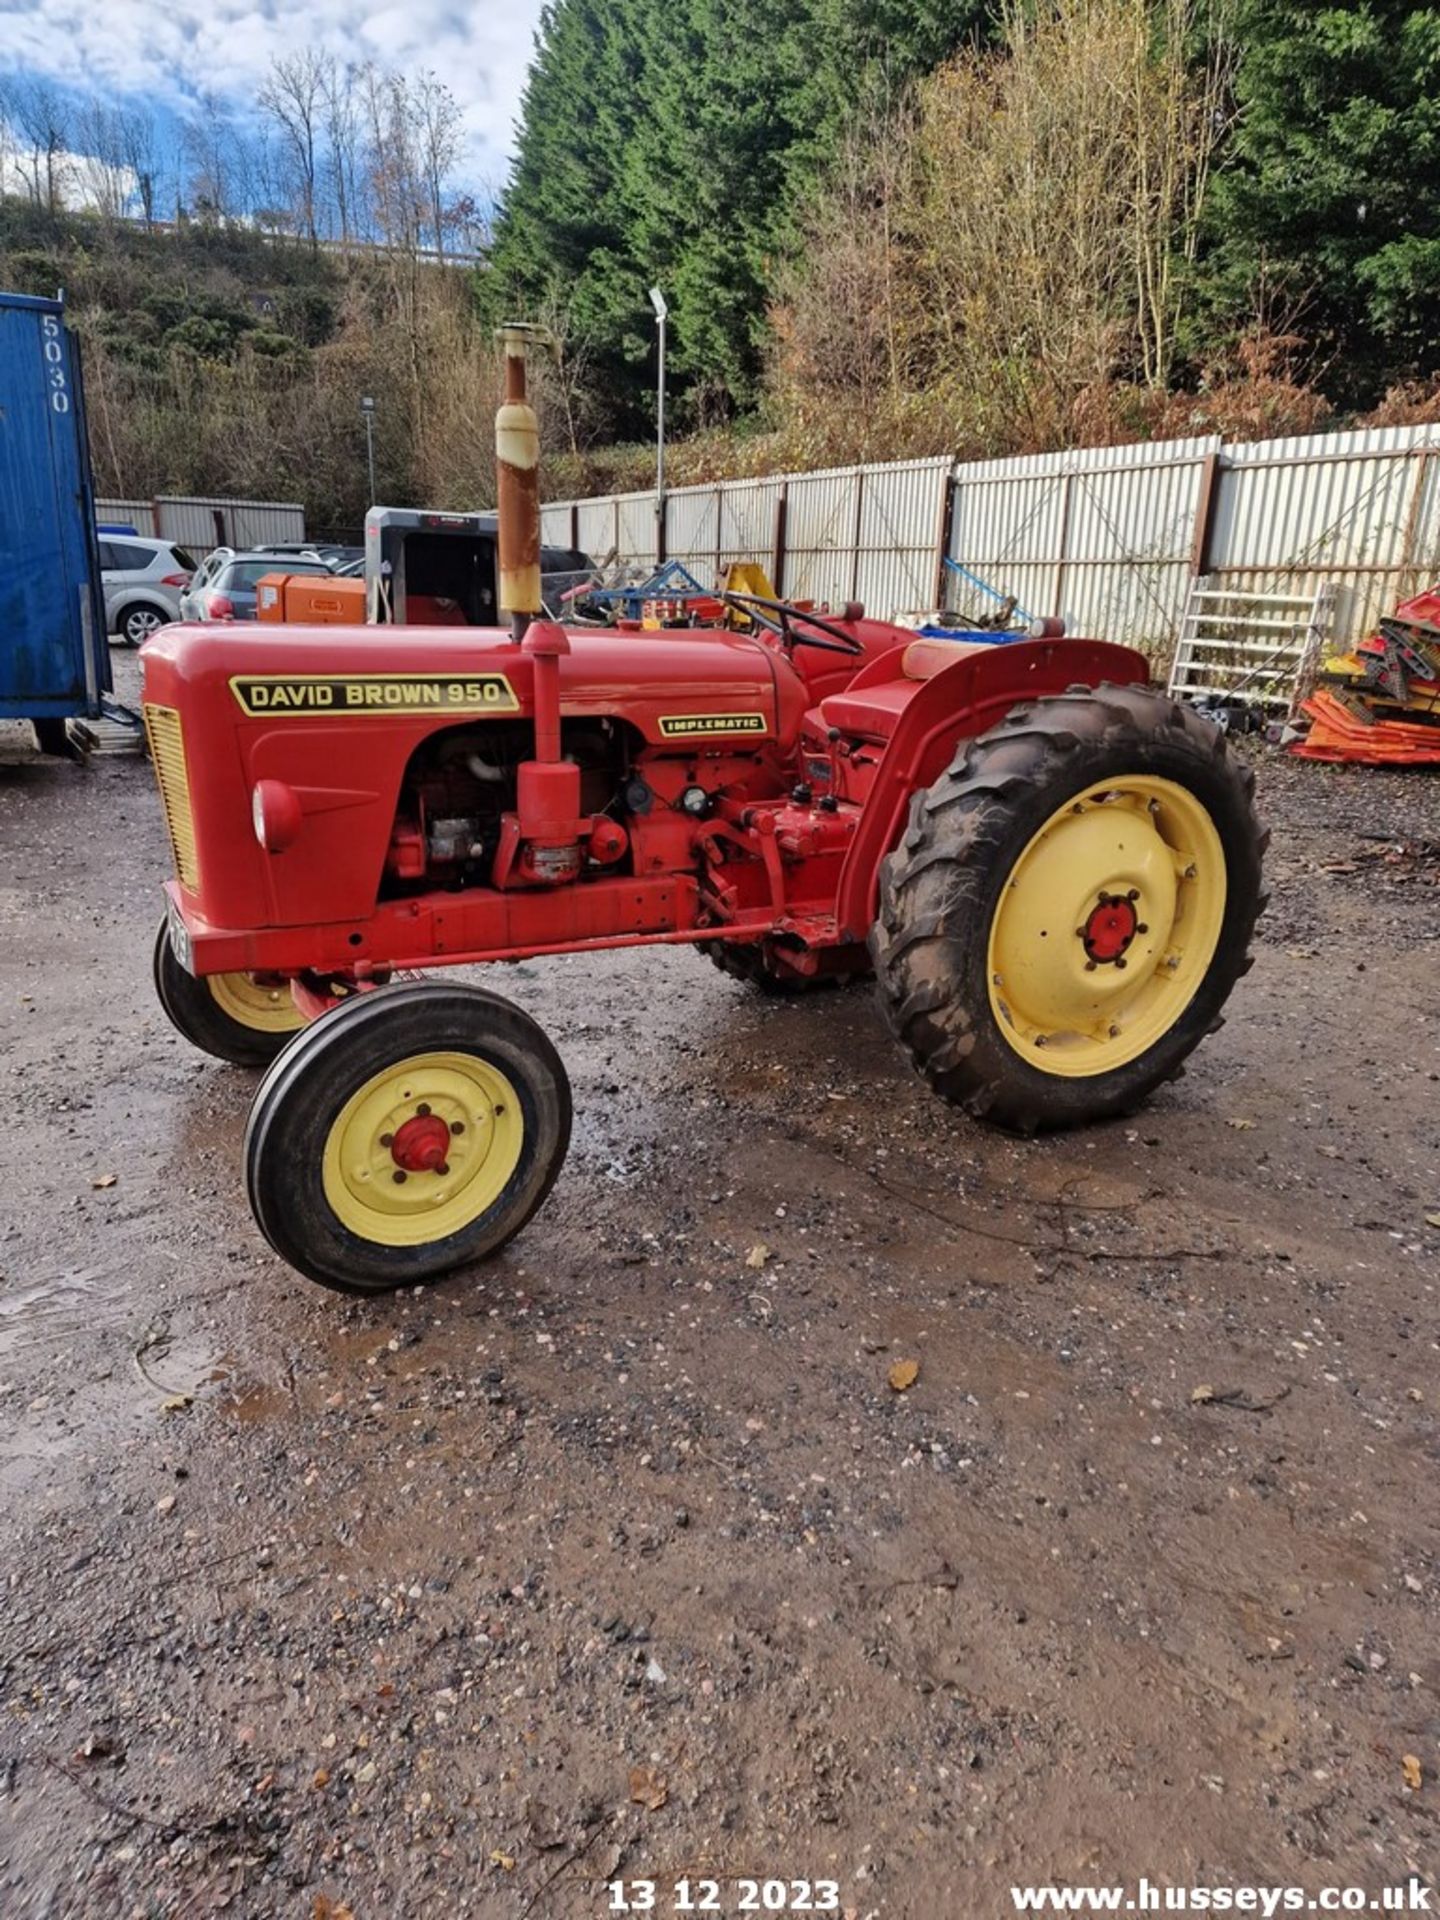 DAVID BROWN 950 IMPLEMATIC TRACTOR VCJ 79 SHOWING AS 1 OWNER ON HPI YEAR 1960